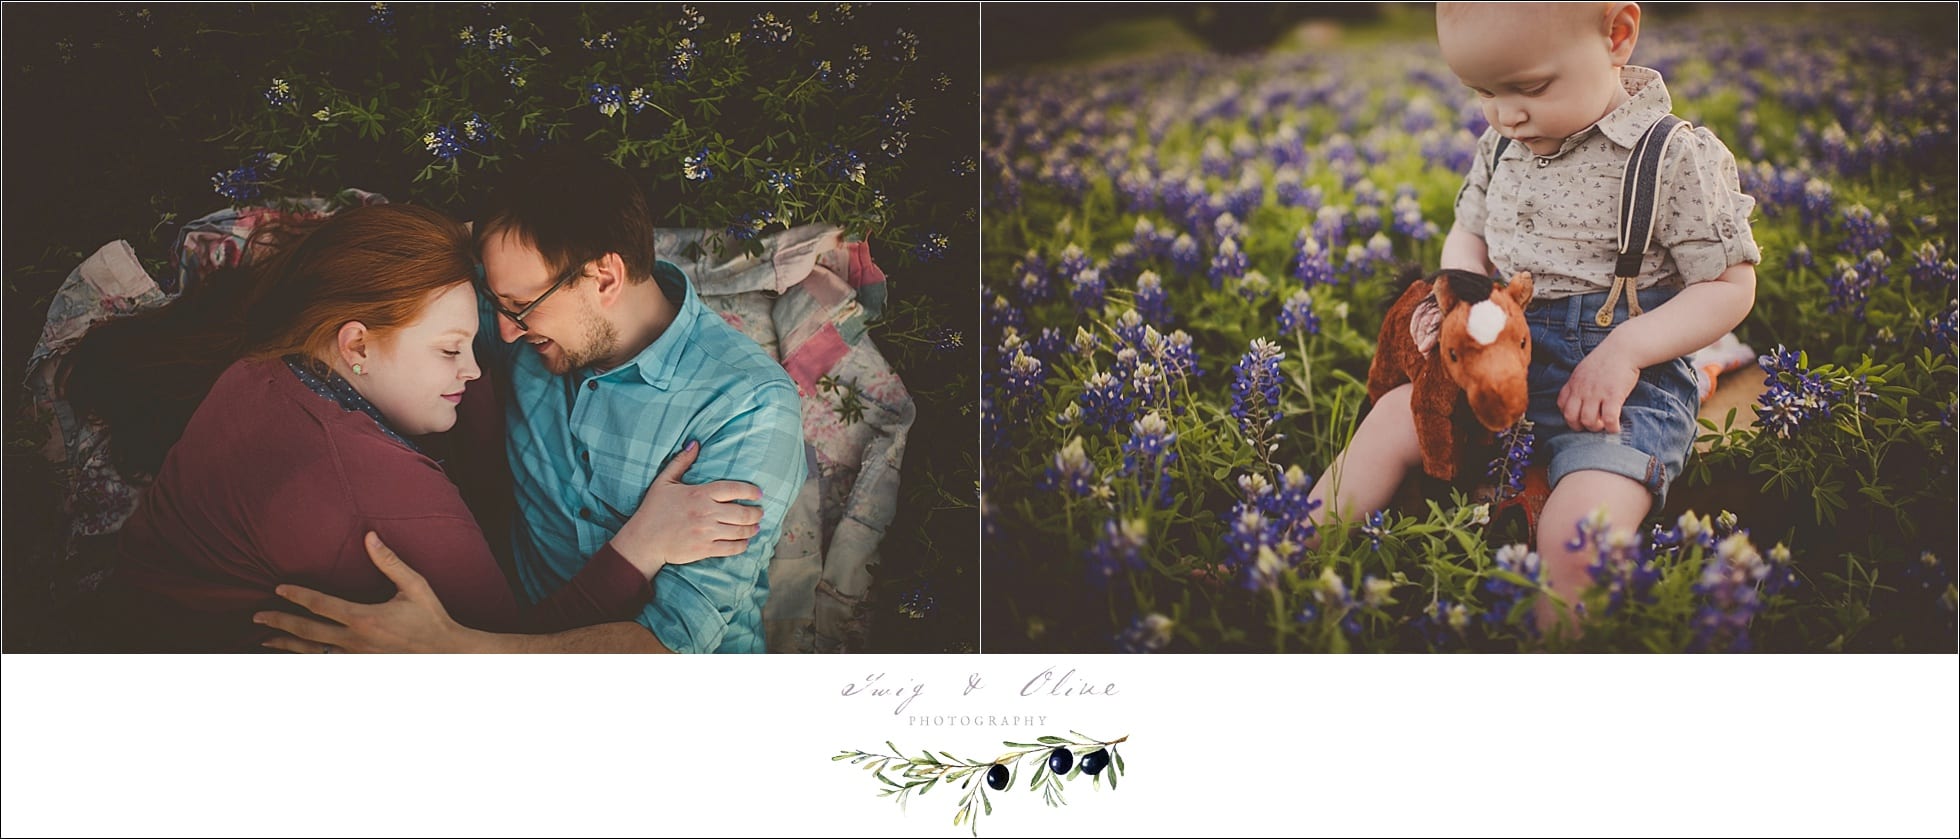 outdoor family session, children and families, flowers, rustic